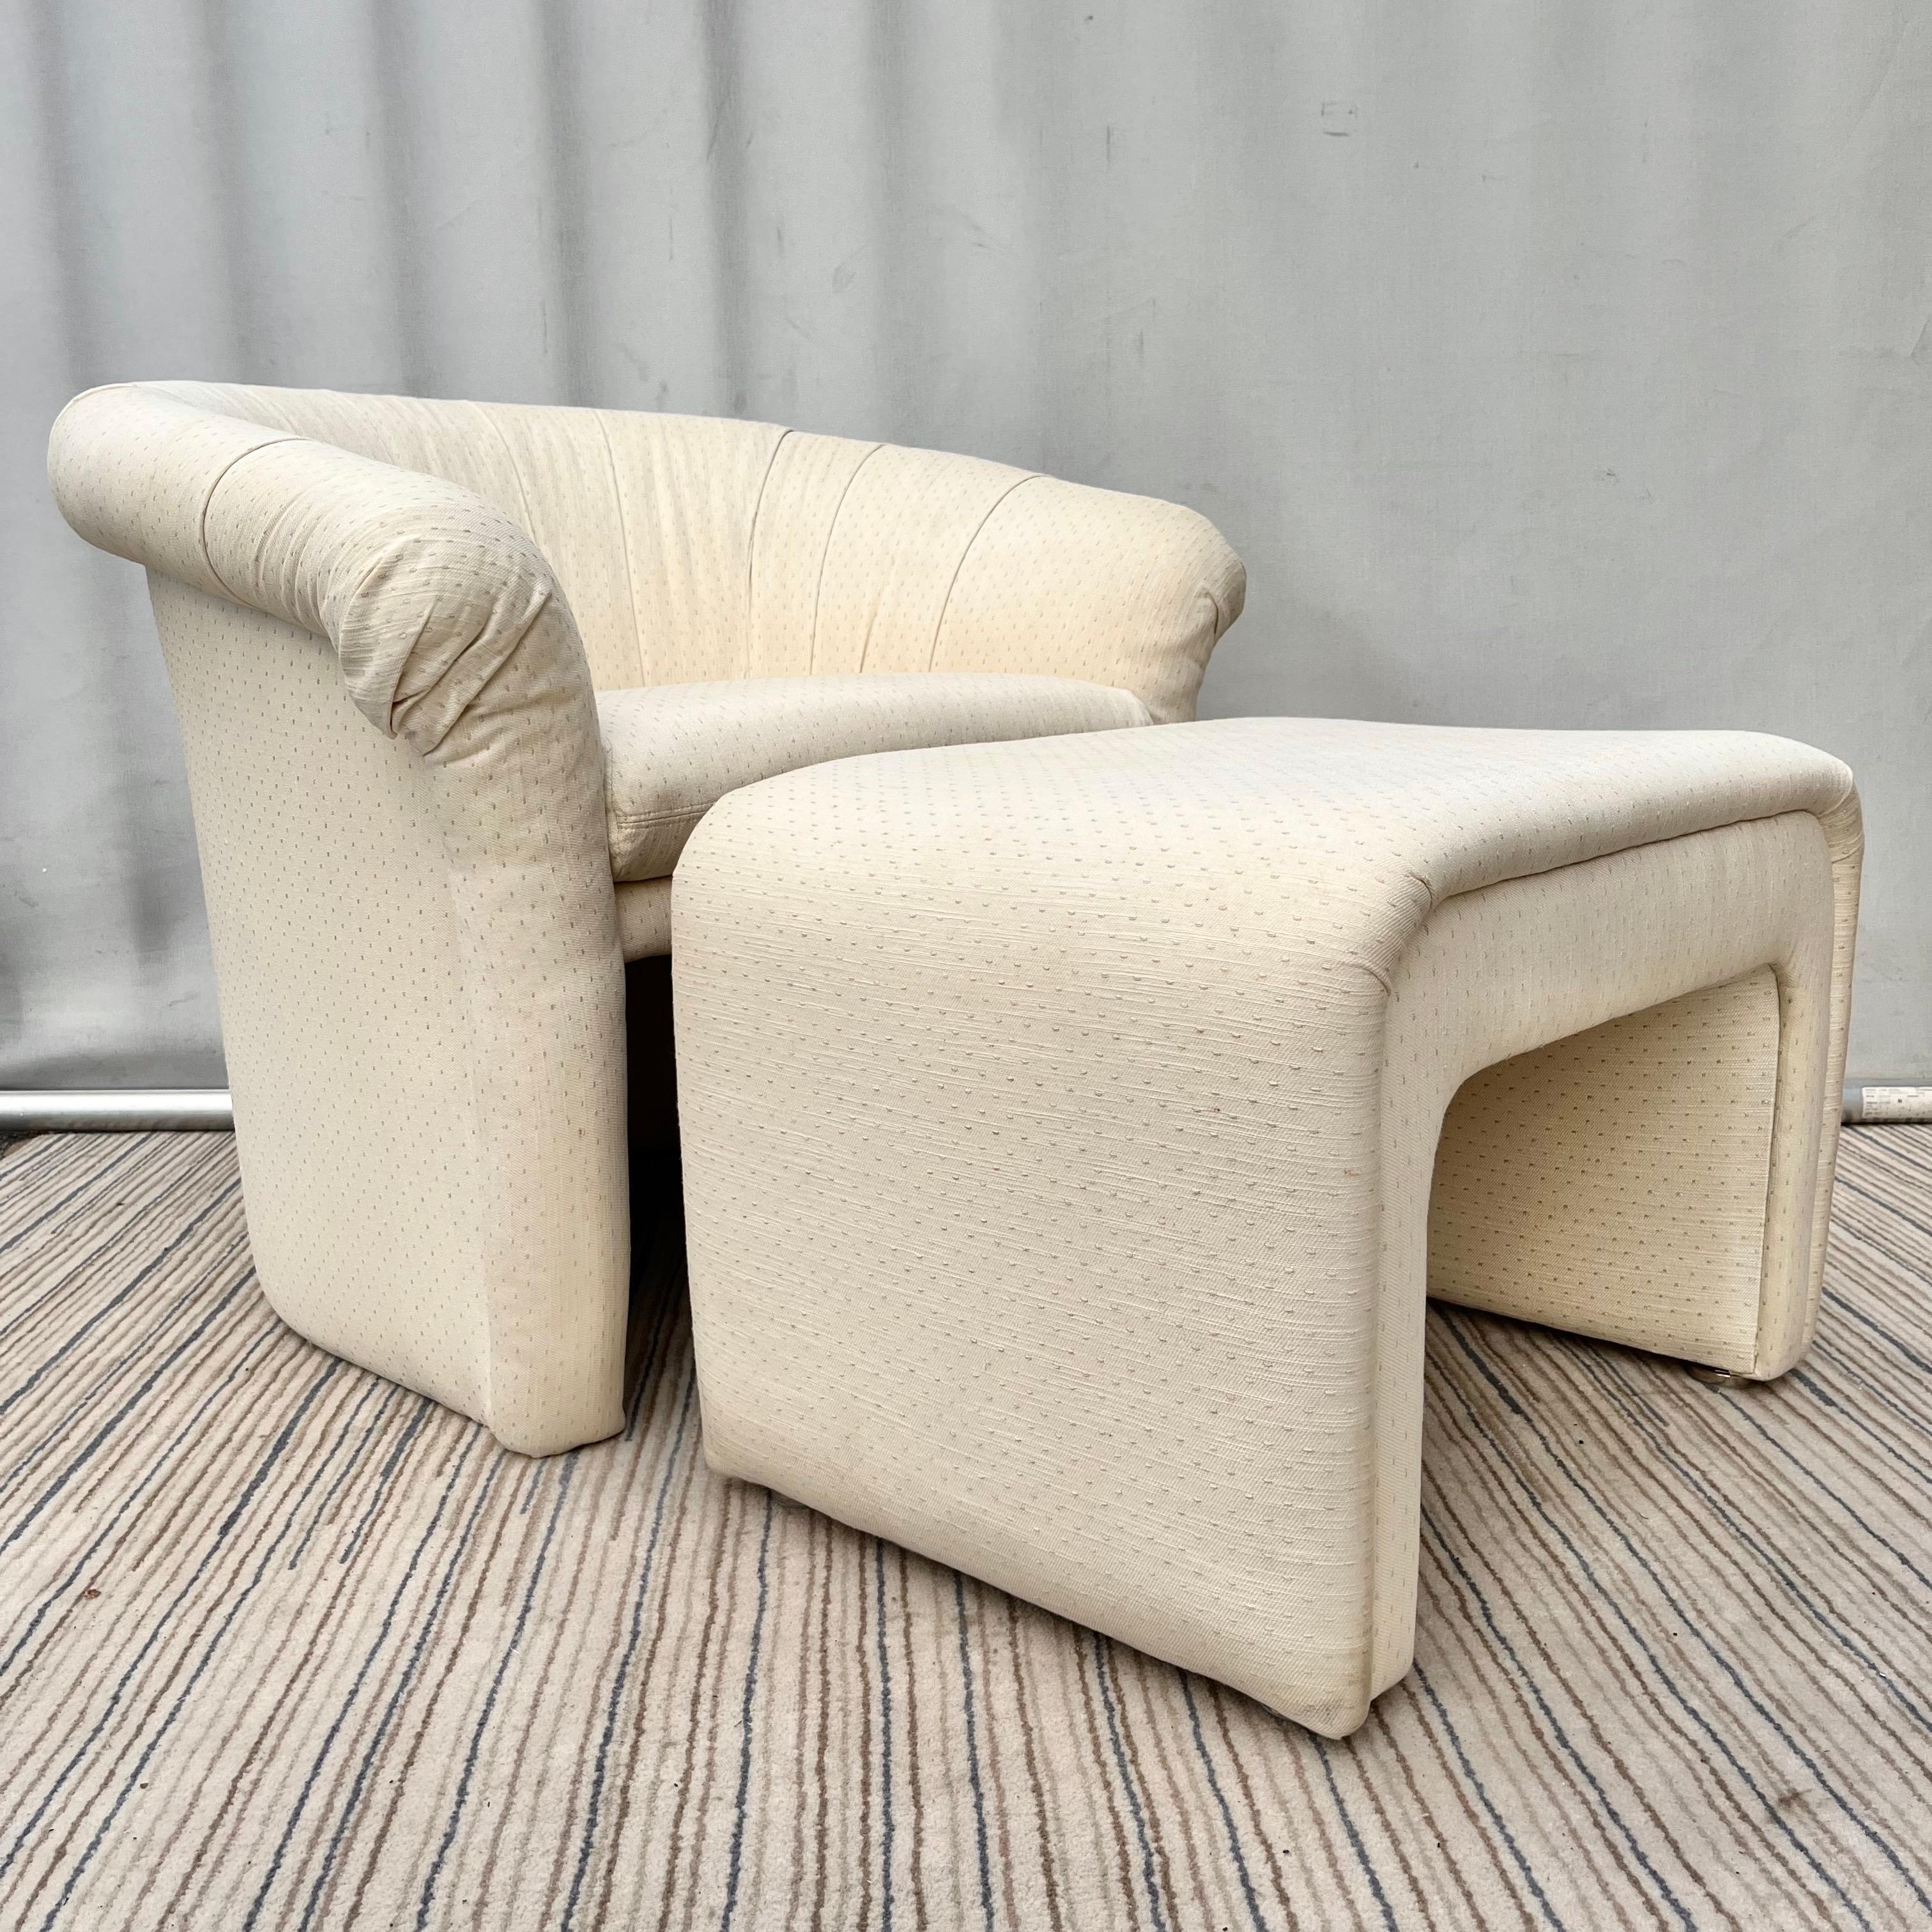 Vintage 1980s Postmodern / Art Deco Revival /Upholstered Lounge Chair With a matching Waterfall Ottoman by Thayer Coggin. Circa 1980s
This set features the original cream color upholstery with soft pastel pinks and teals tones alternate stitching.